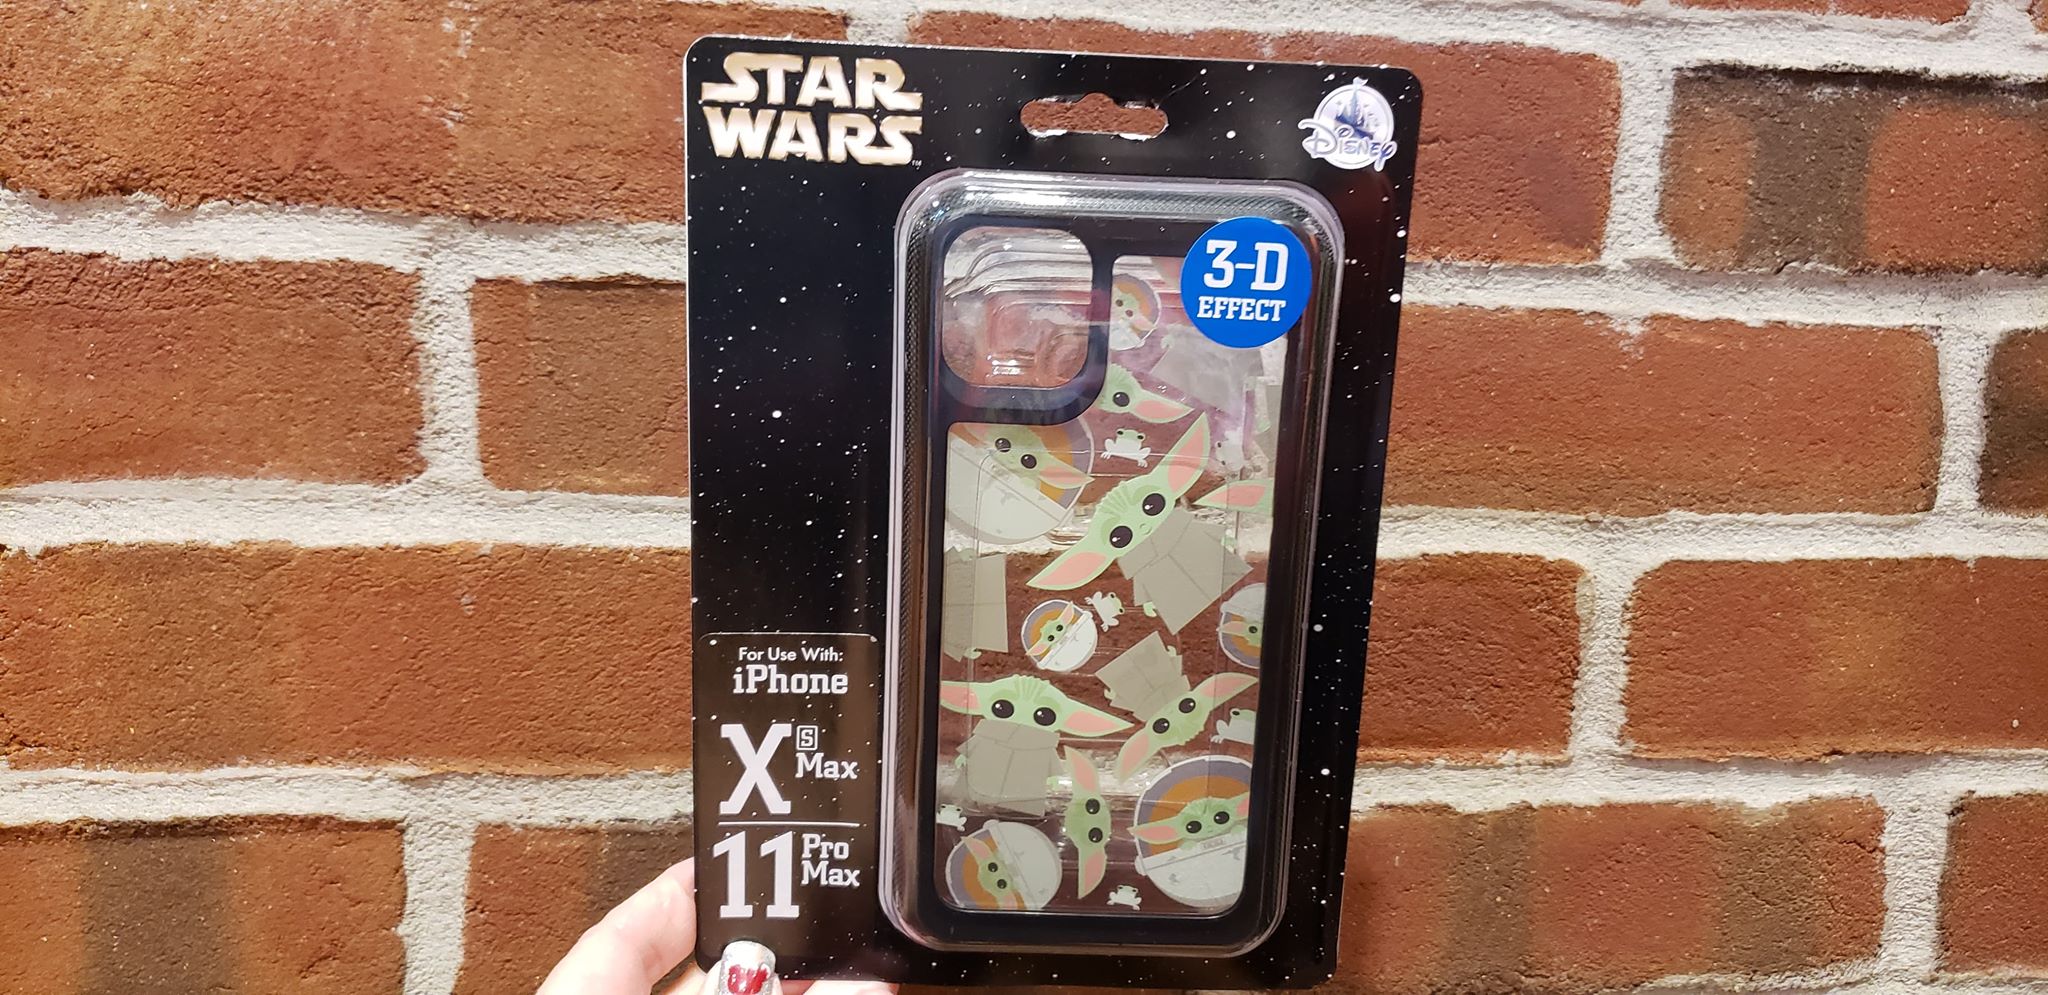 New Baby Yoda MagicBands, Phone Cases, And Magnets At D-Tech